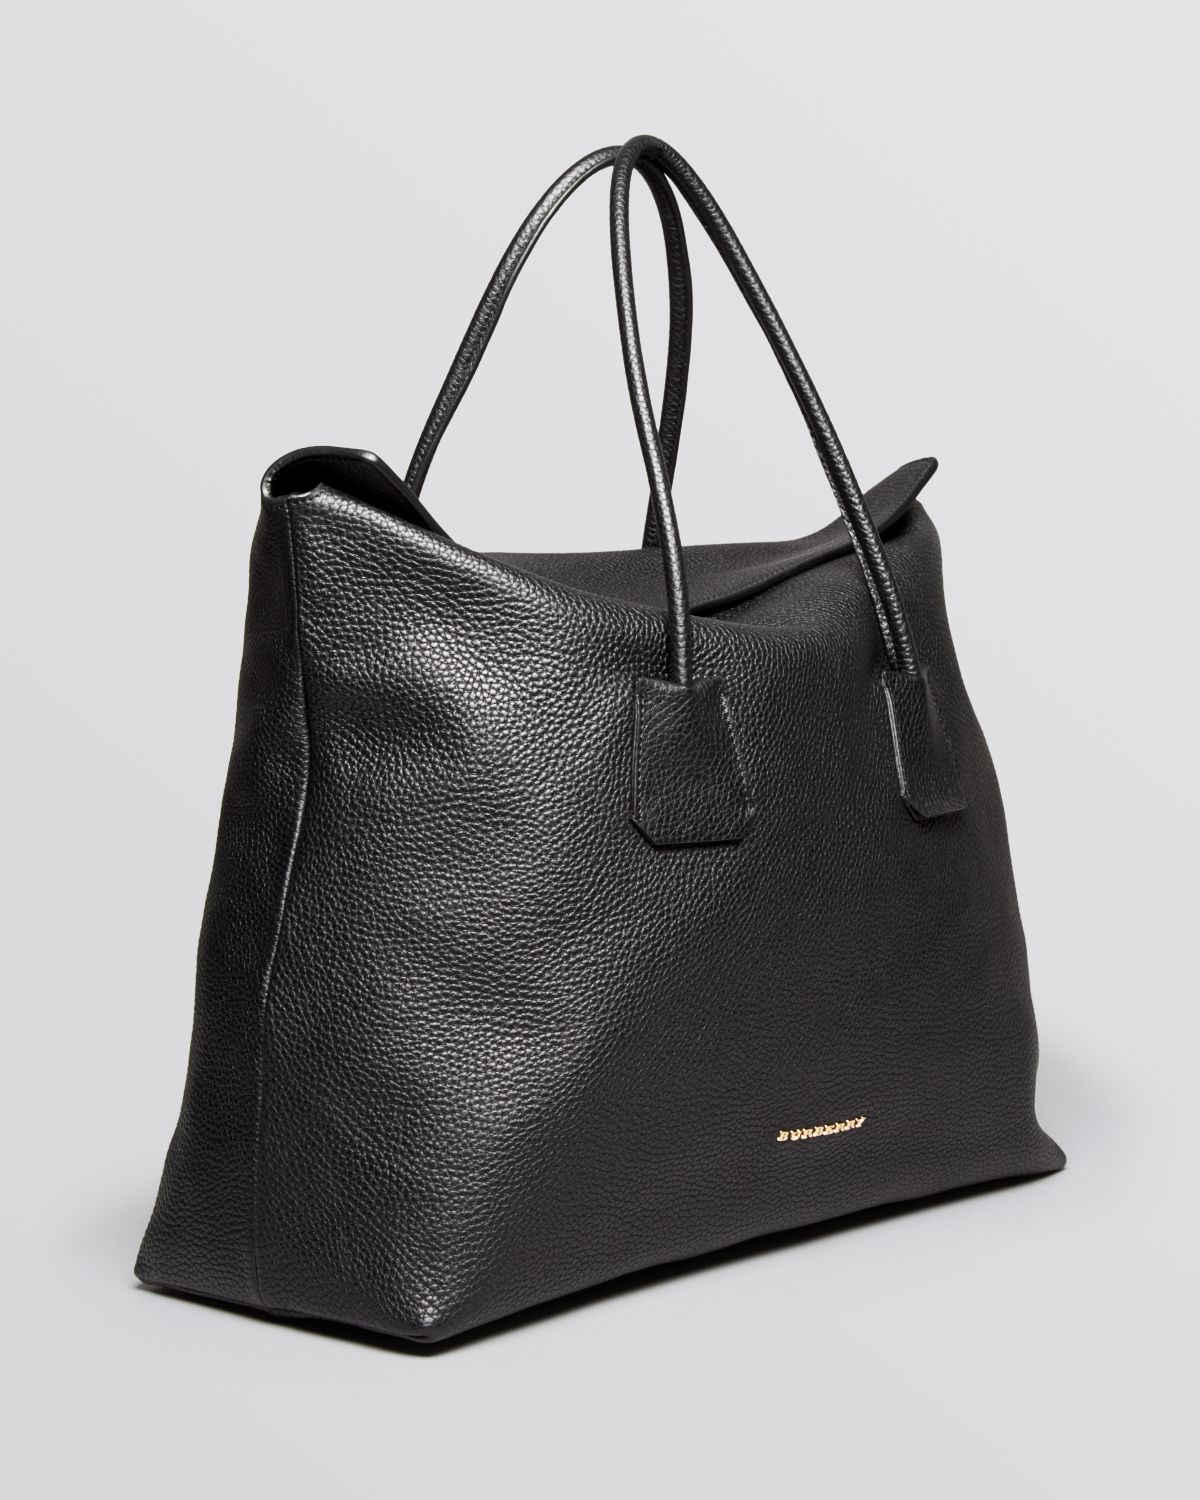 Burberry Tote London Grainy Leather Large Baynard in Black - Lyst